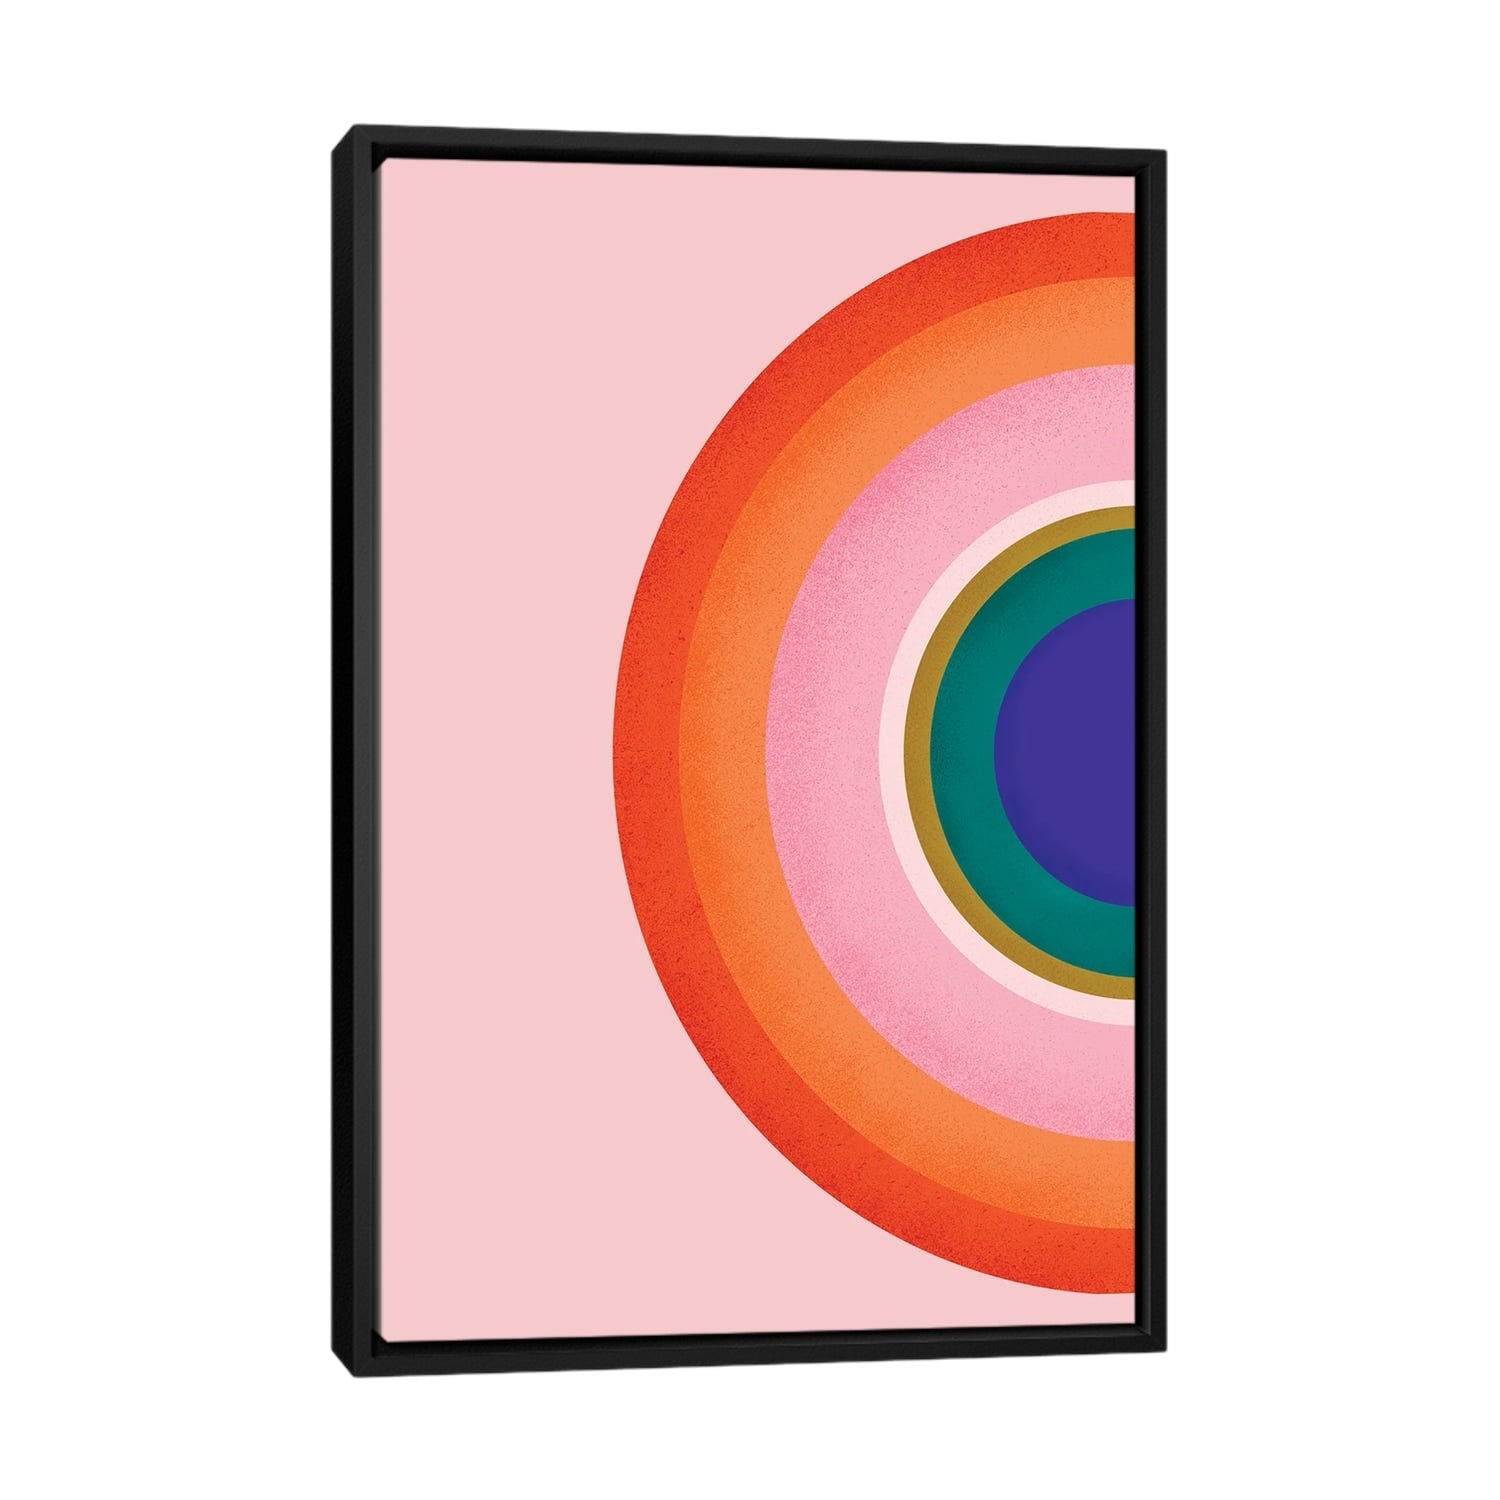 Framed Canvas Art (Gold Floating Frame) - Colorful Half Circle by Show Me Mars (styles > Abstract art) - 26x18 in